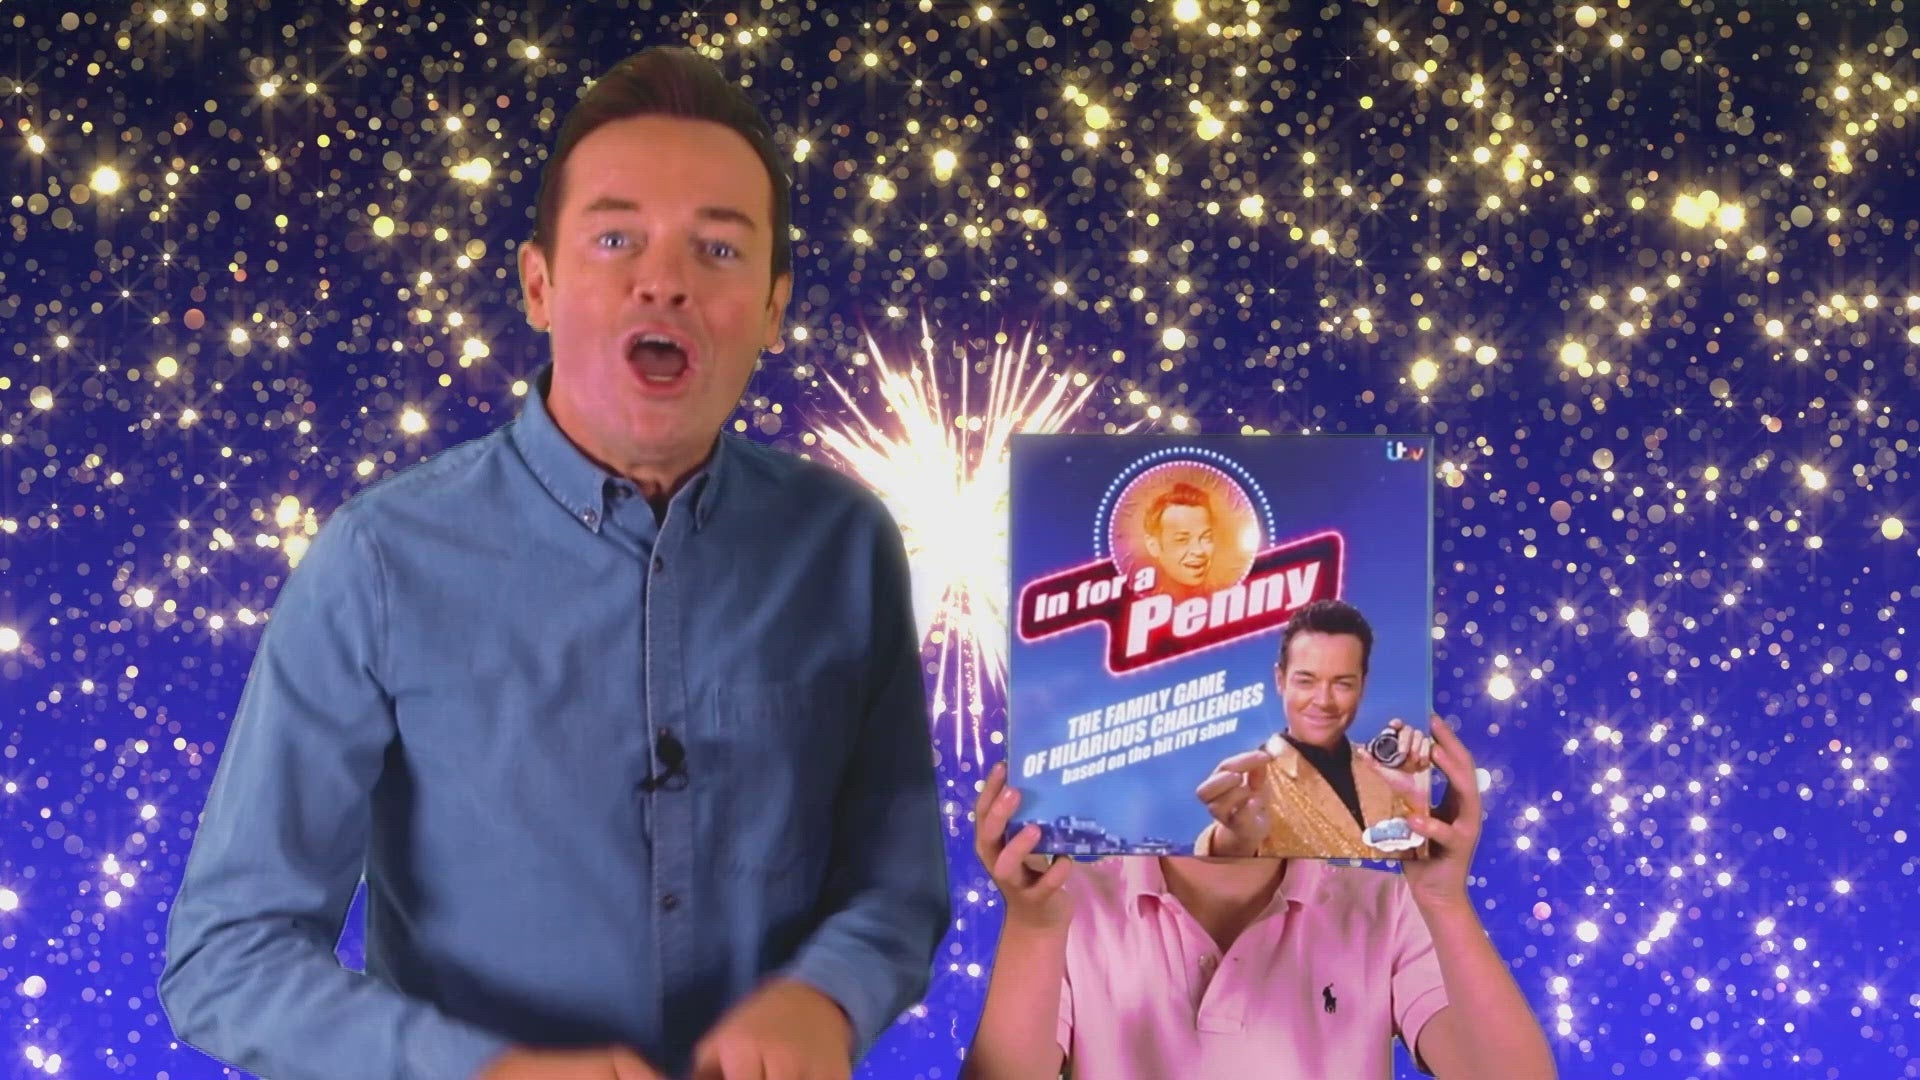 Stephen Mulhern brings you the hit TV Show In For a Penny in a board game - watch Ant and Dec play the game and see how they did